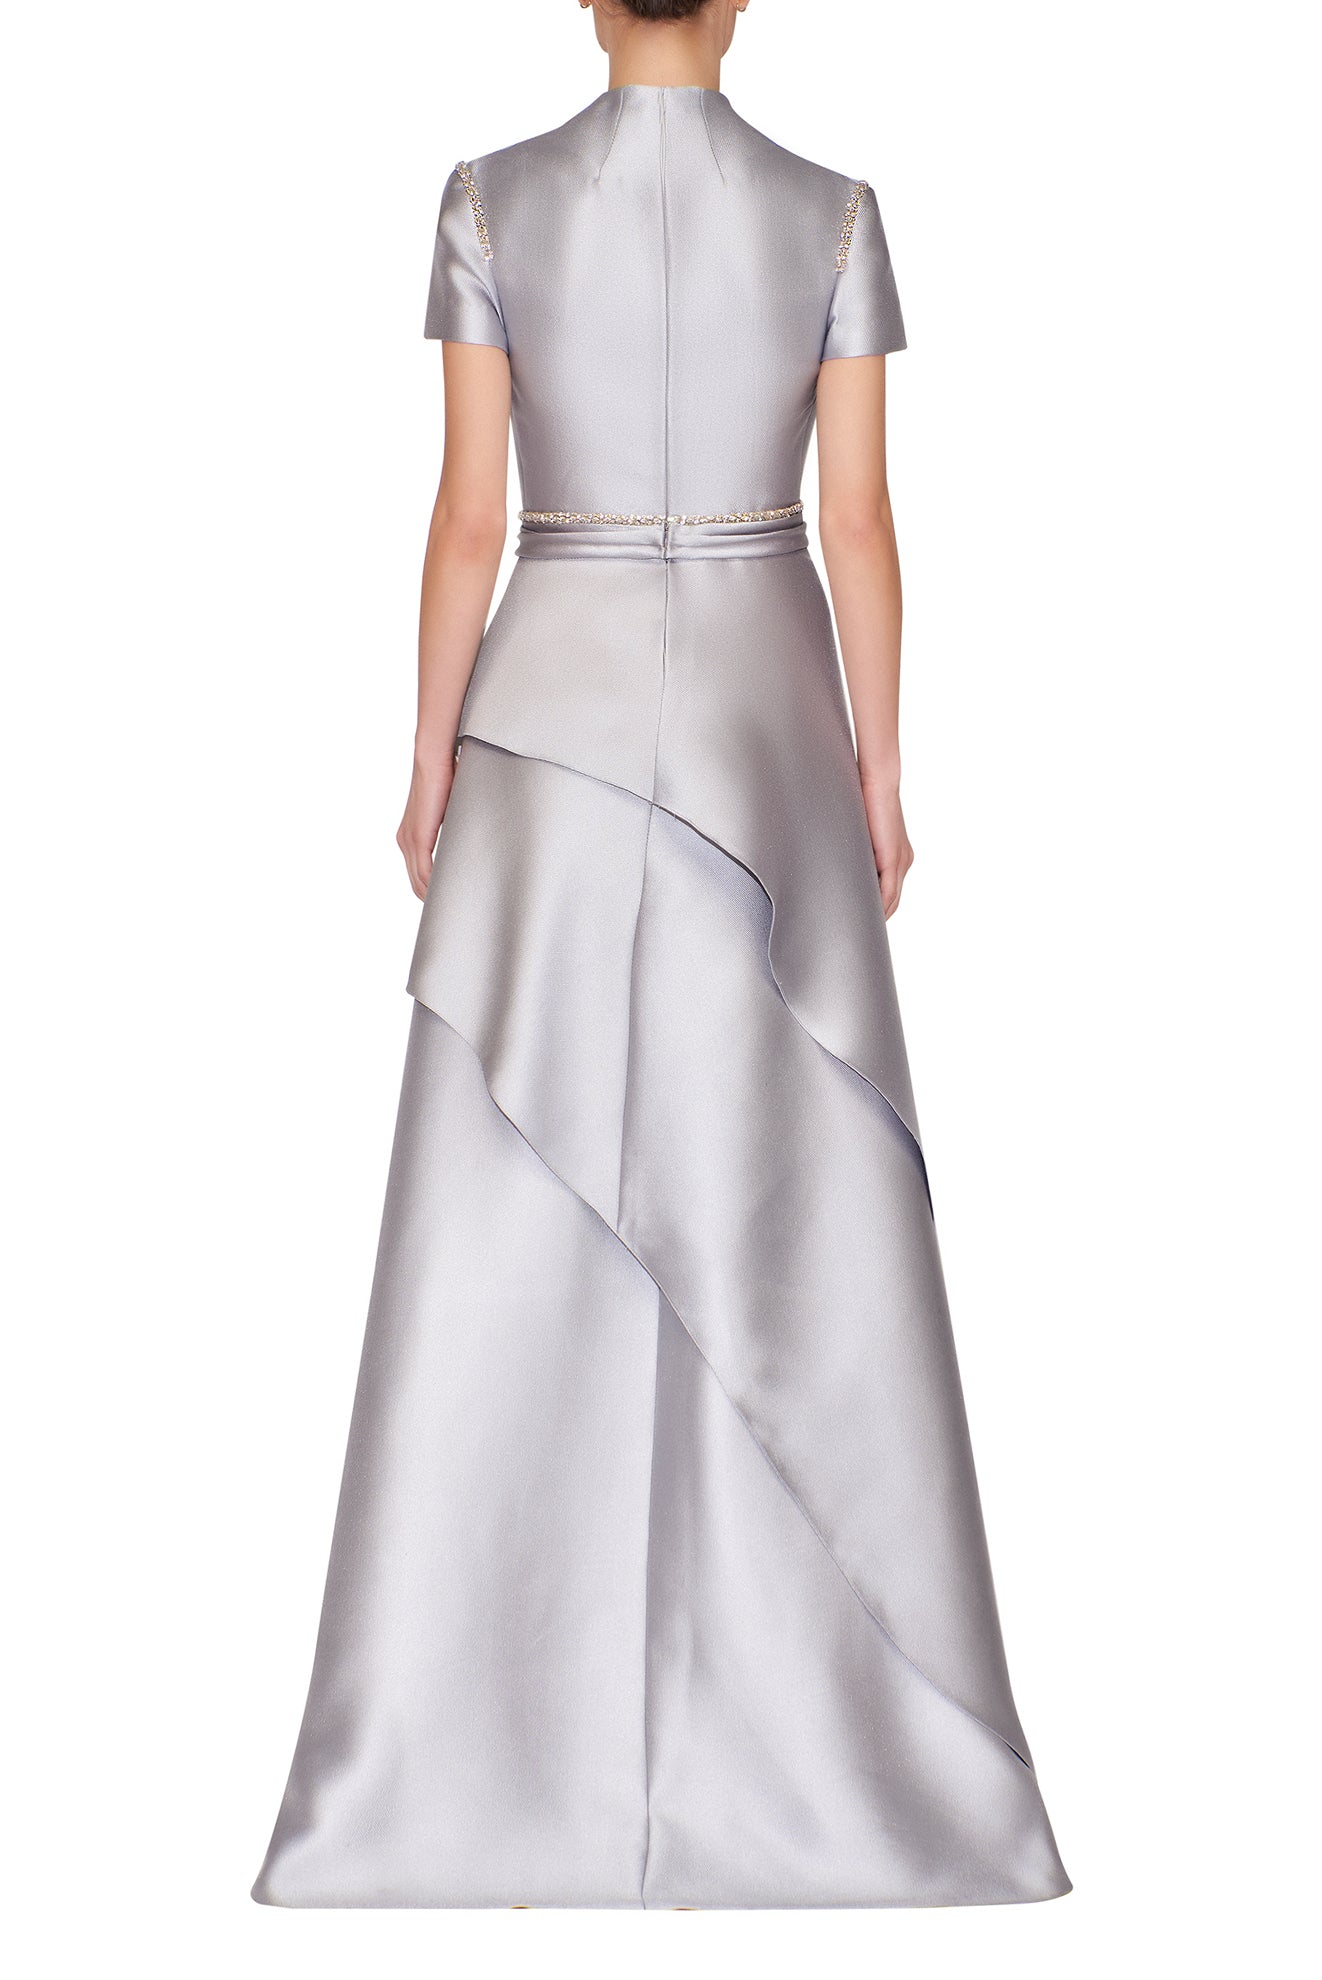 CAP SLEEVE, HIGH V-NECK DRESS WITH ASYMMETRICAL SKIRT AND EMBROIDERED DETAILS